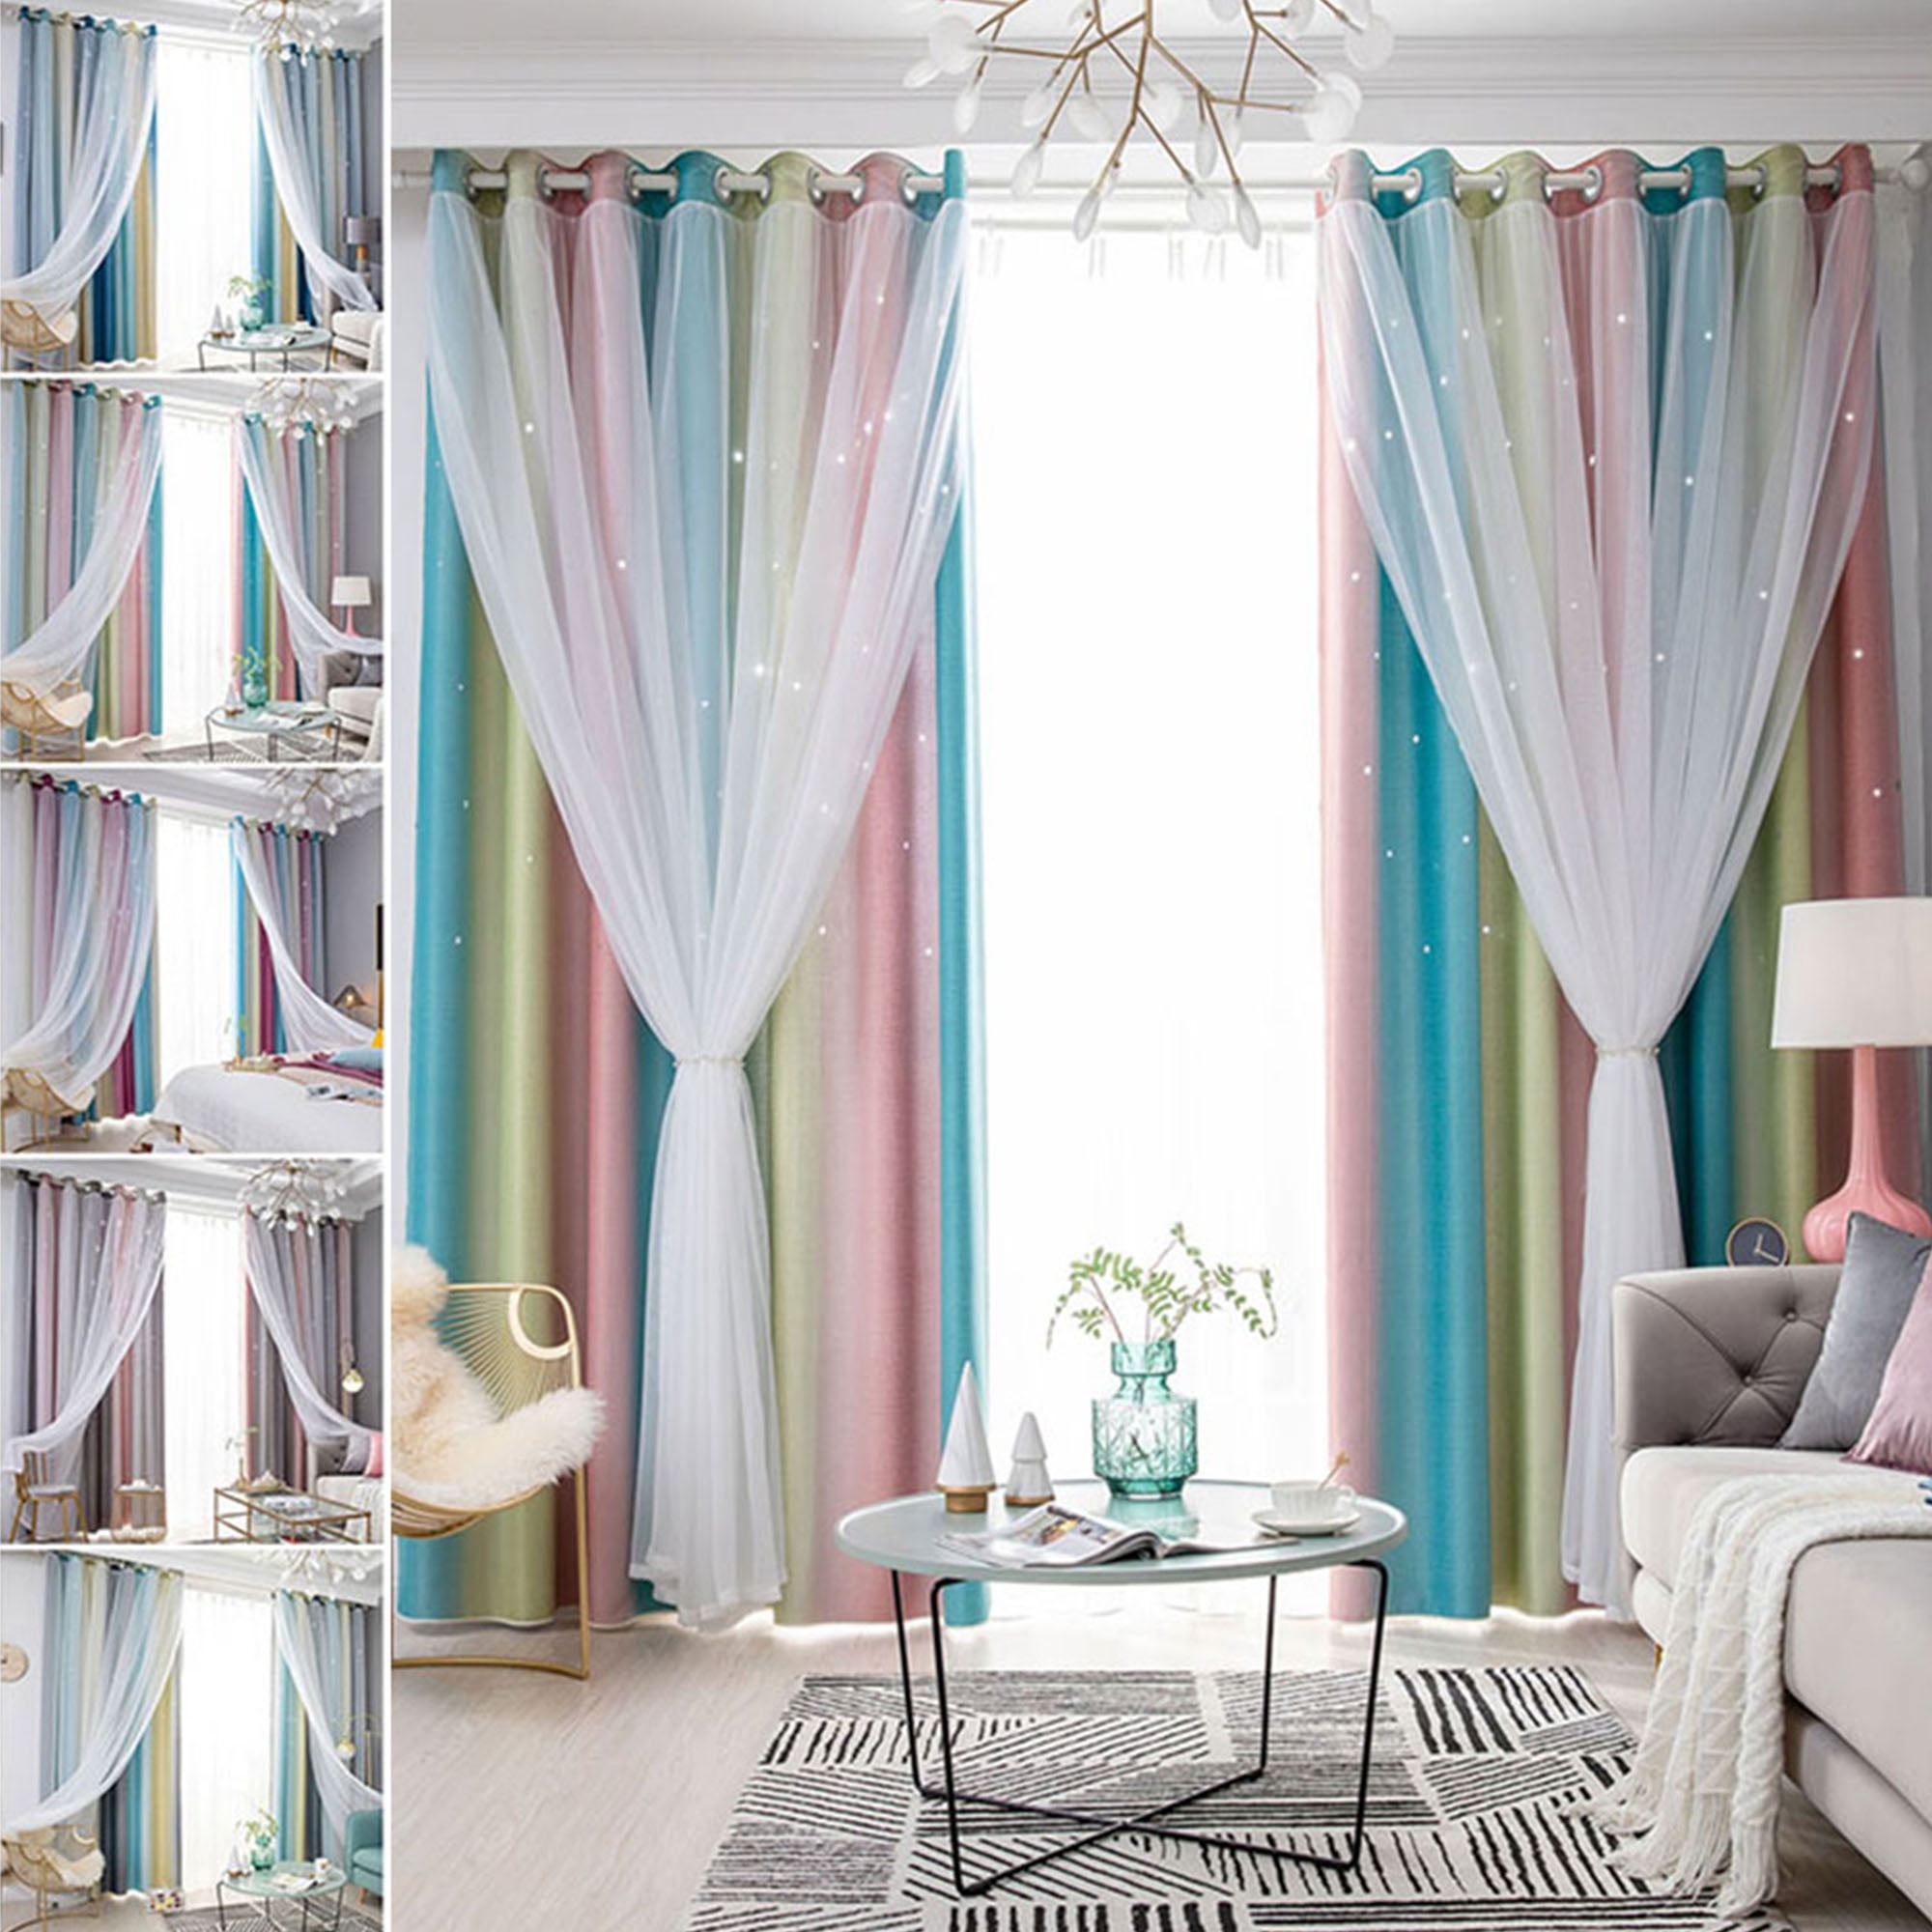 Window Curtains Hollow-out Star Drape Eyelet Living Room Bedroom Panels Drapes 